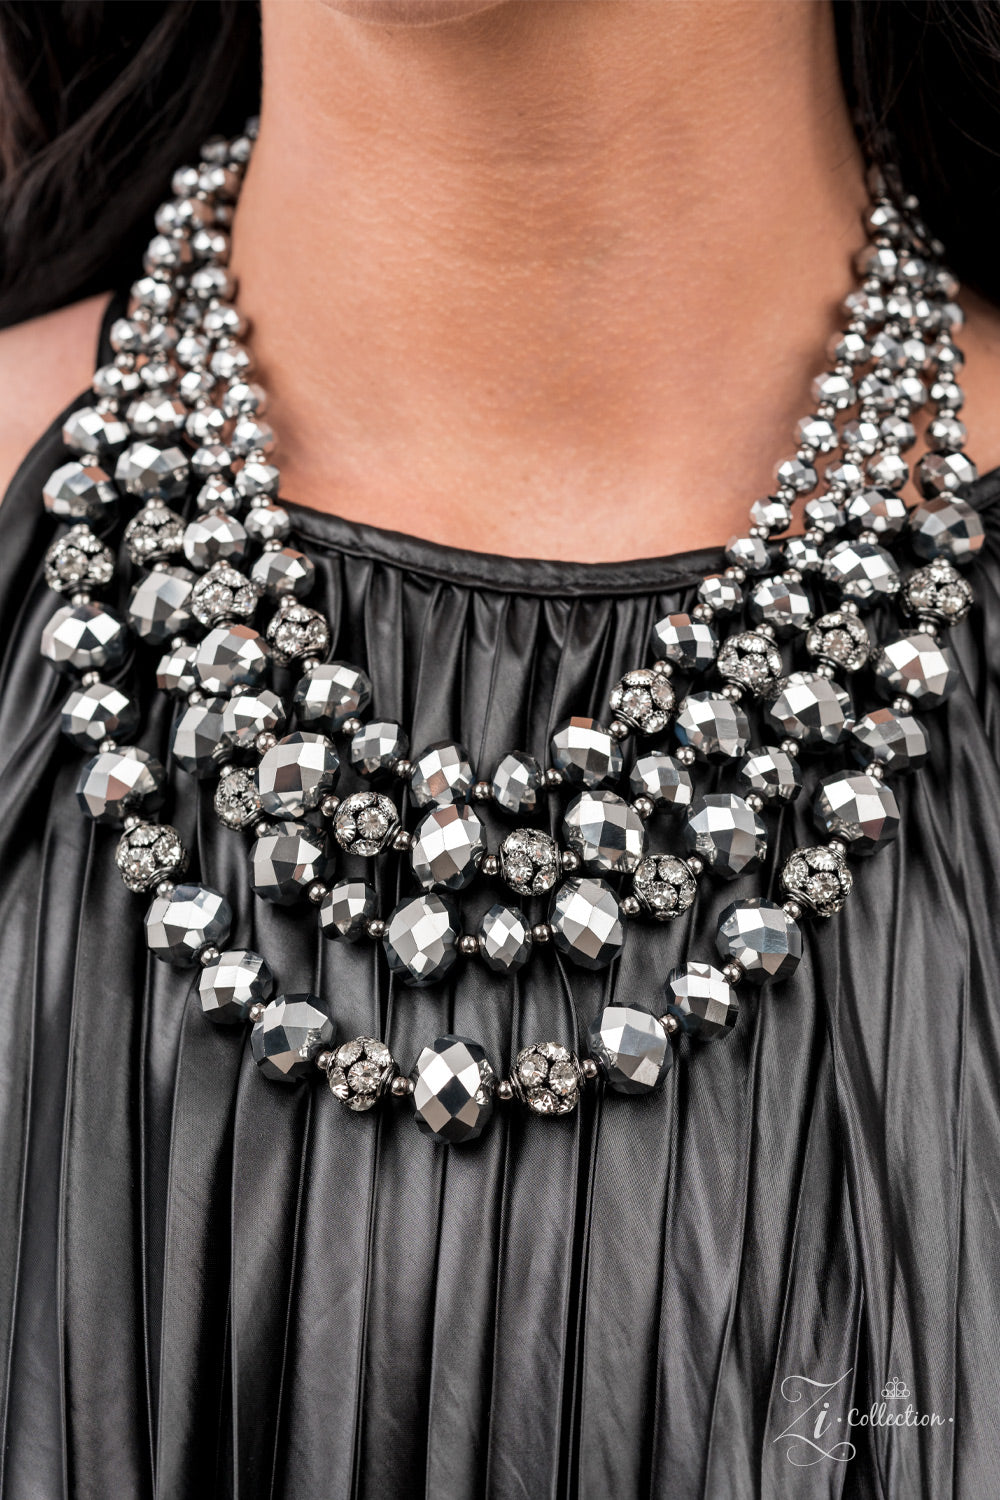 Influential 2021 Zi Collection Necklace - Paparazzi Accessories  Gradually increasing in size and intensity, dainty gunmetal beads, faceted hematite-like crystals, and white rhinestone studded gunmetal ornaments unapologetically connect into dauntless rows below the collar. The radiantly regal layers flash and refract the light, creating a smoldering statement piece. Features an adjustable clasp closure.  Sold as one individual necklace. Includes one pair of matching earrings.